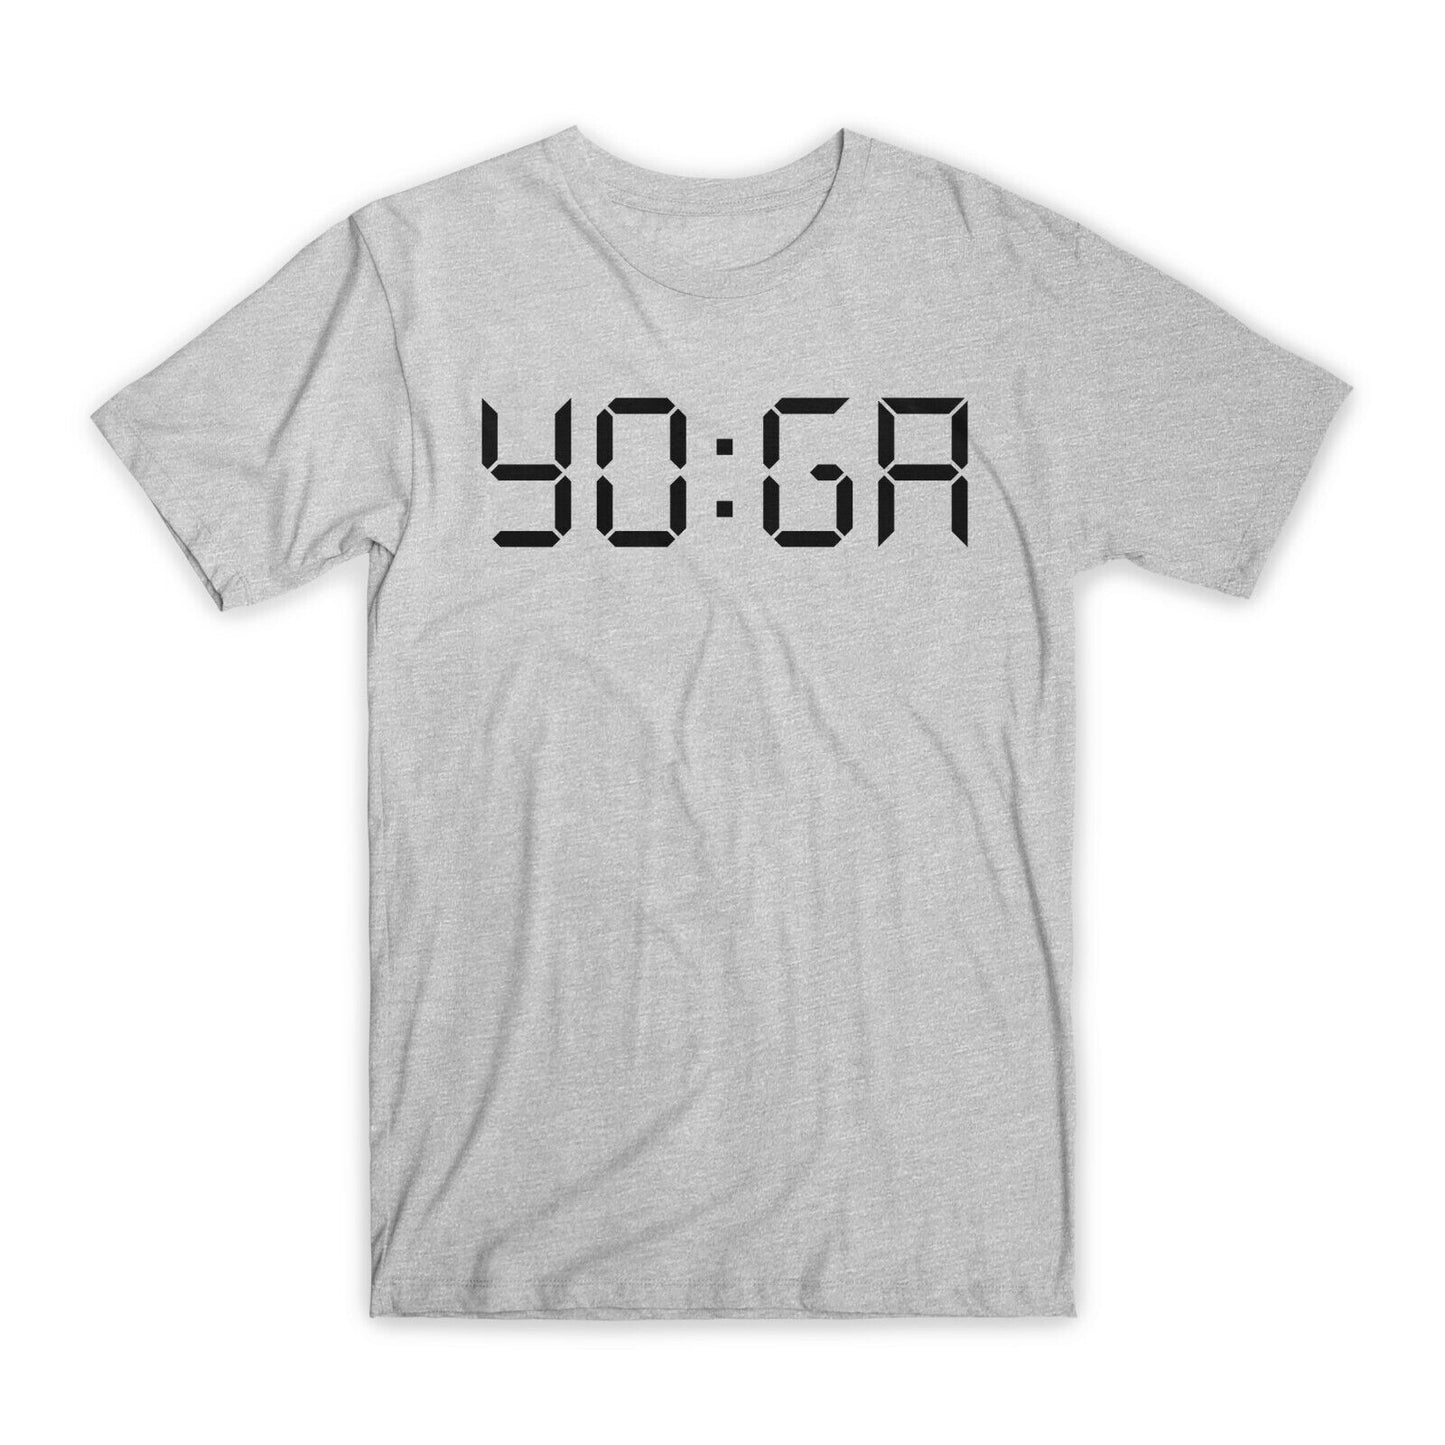 Yoga Printed T-Shirt Premium Soft Cotton Crew Neck Funny Tees Novelty Gifts NEW